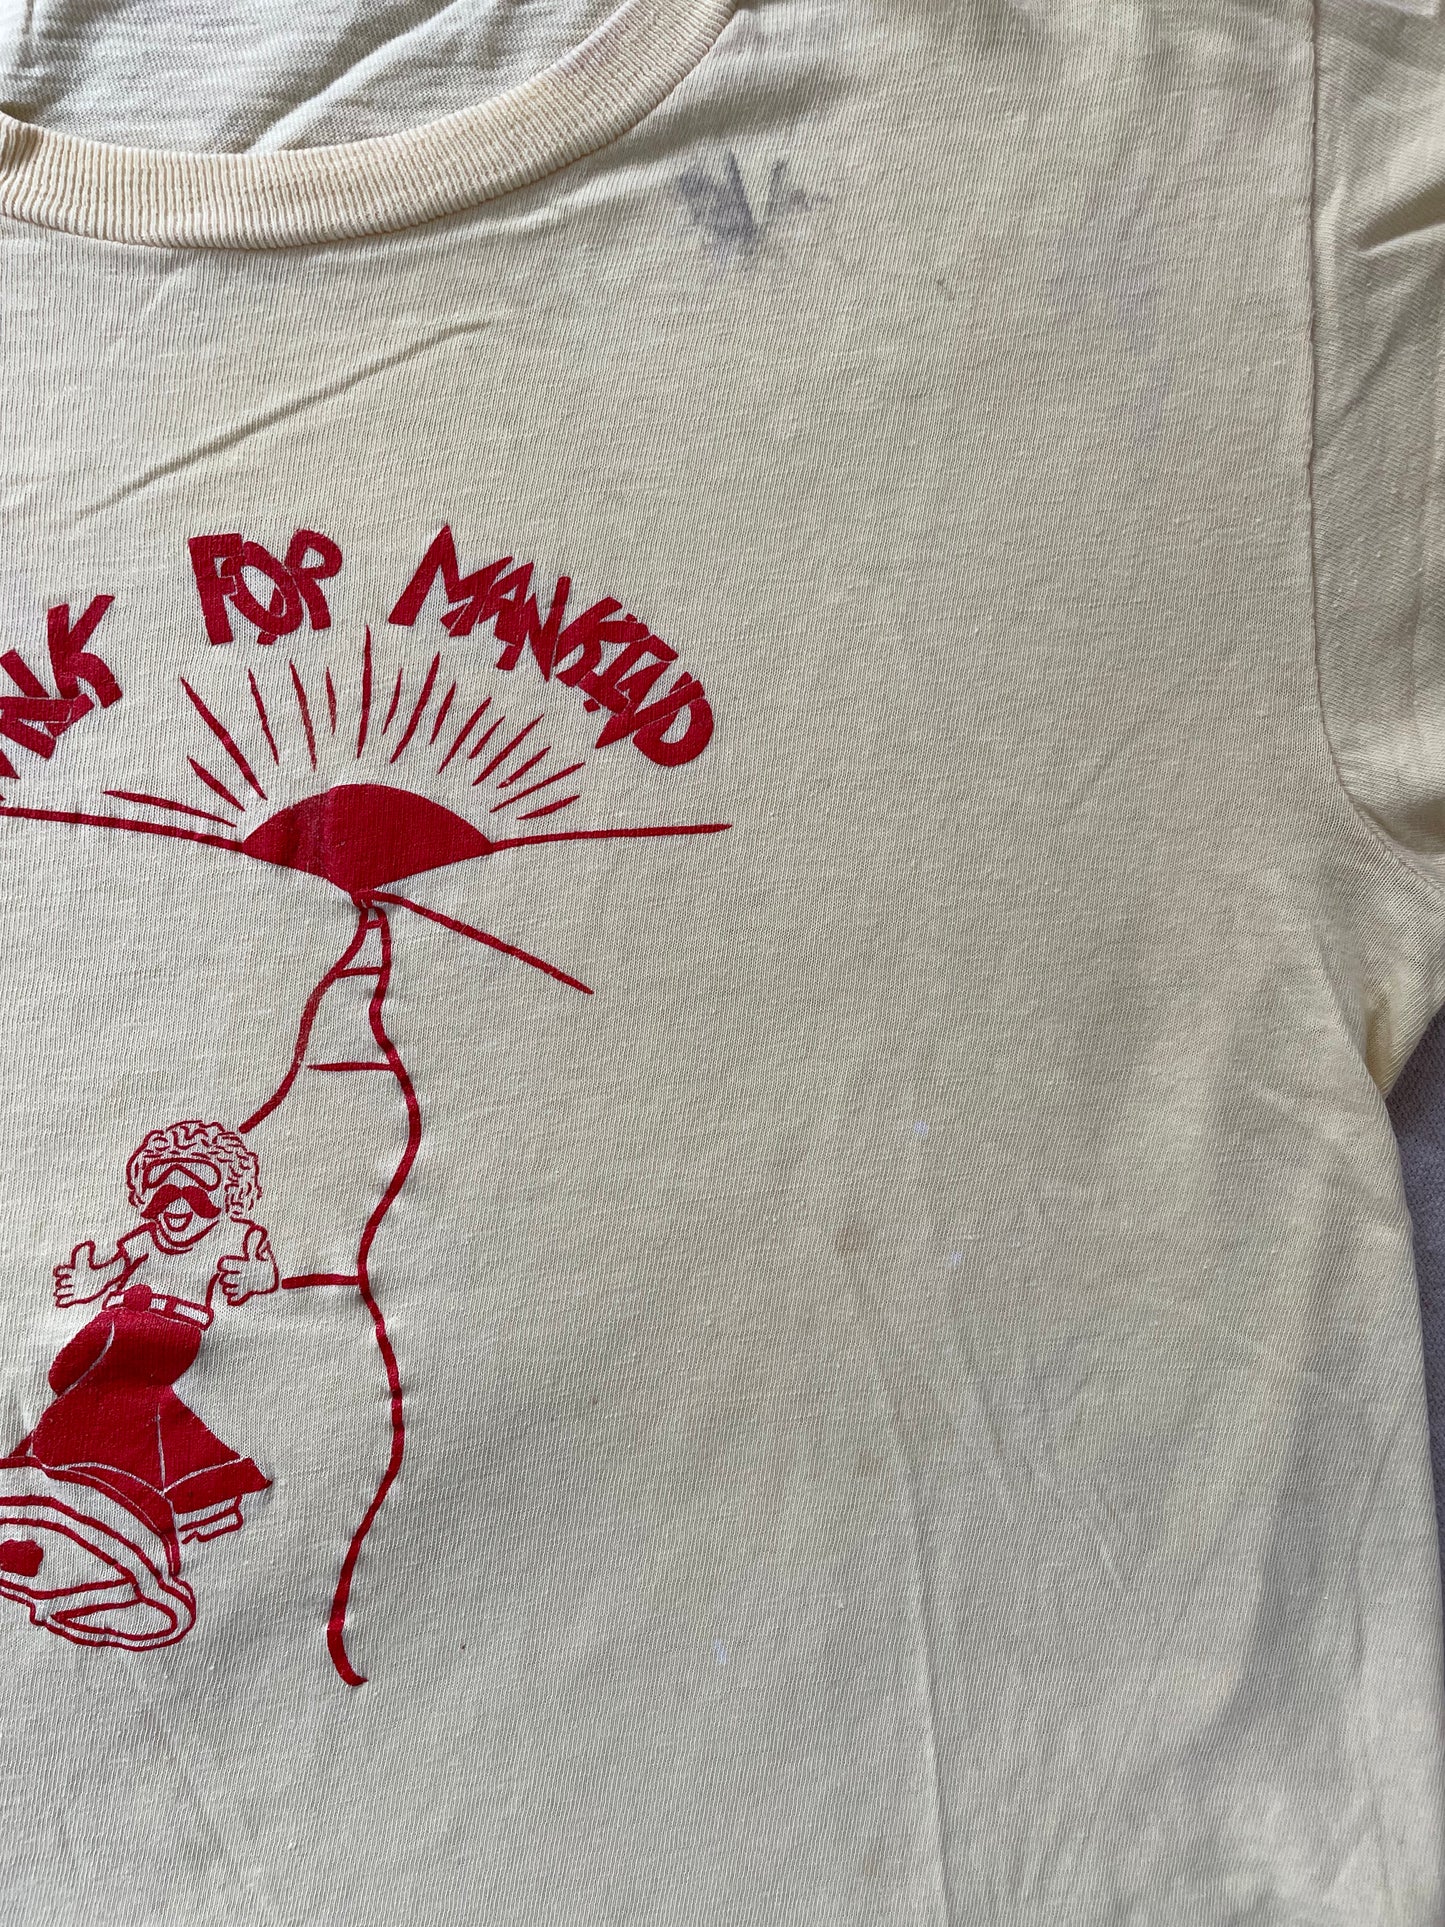 70s Walk For Mankind Tee